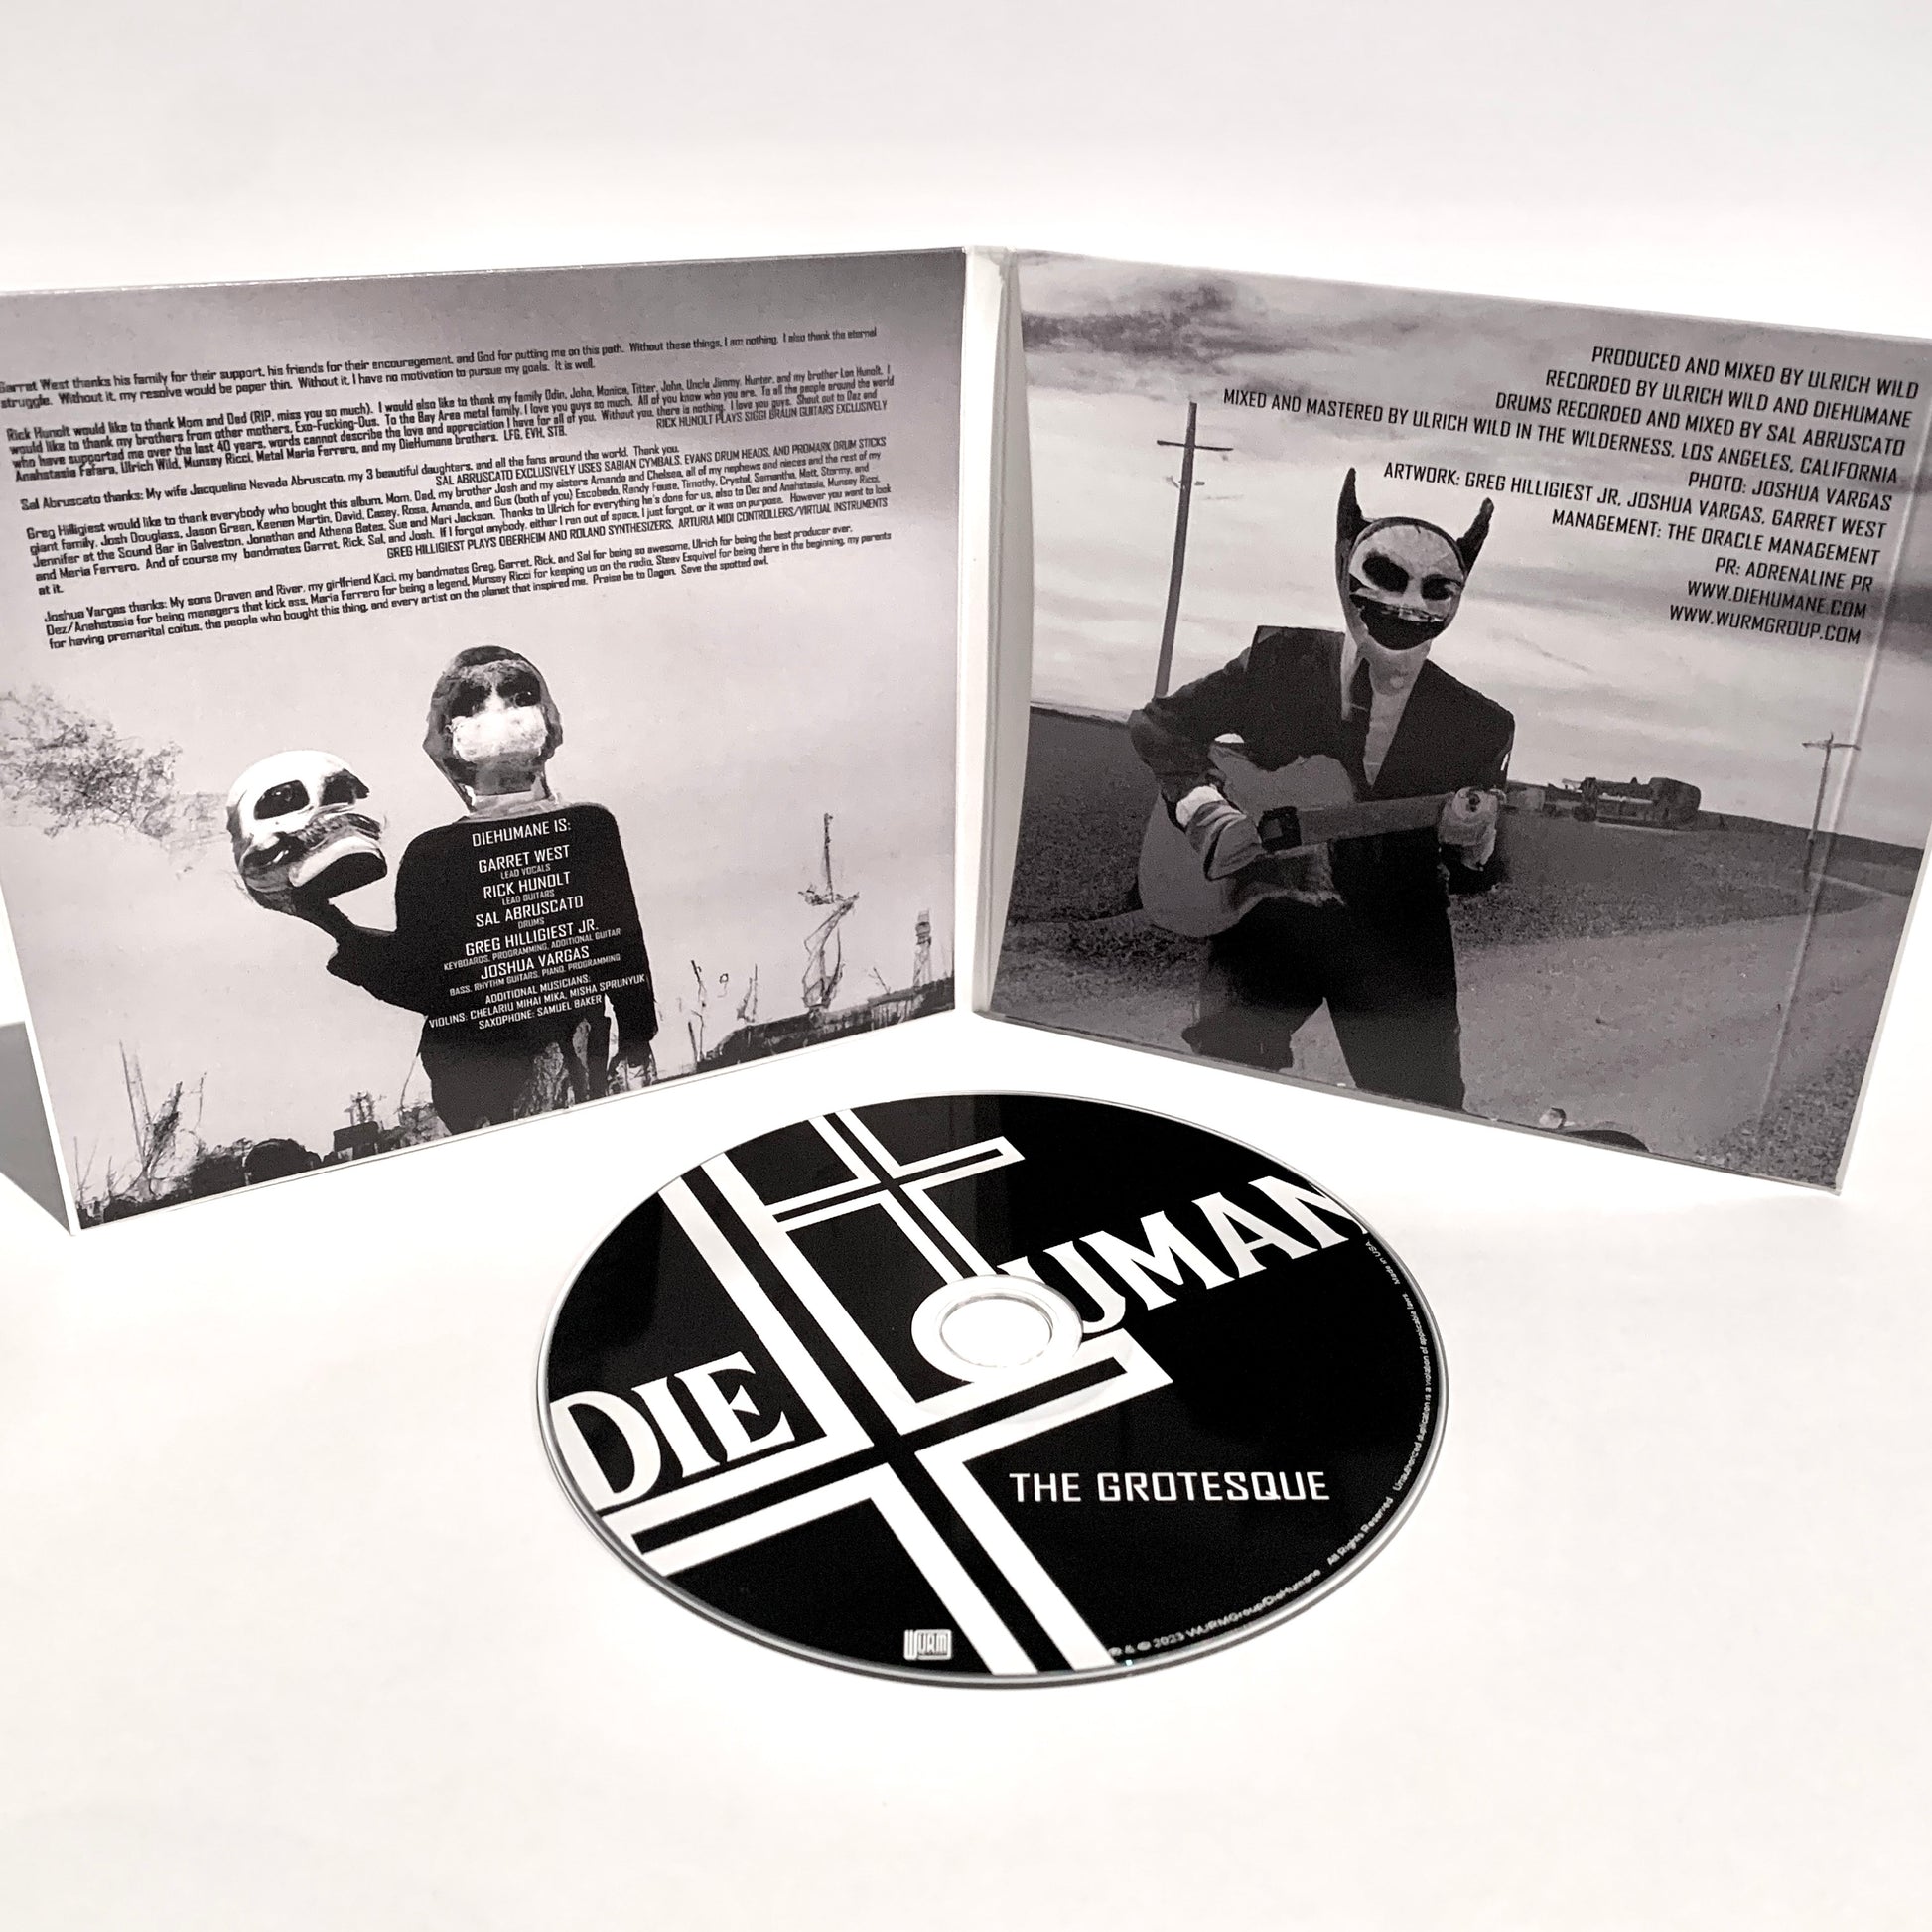 DieHumane - The Grotesque CD with inside panels